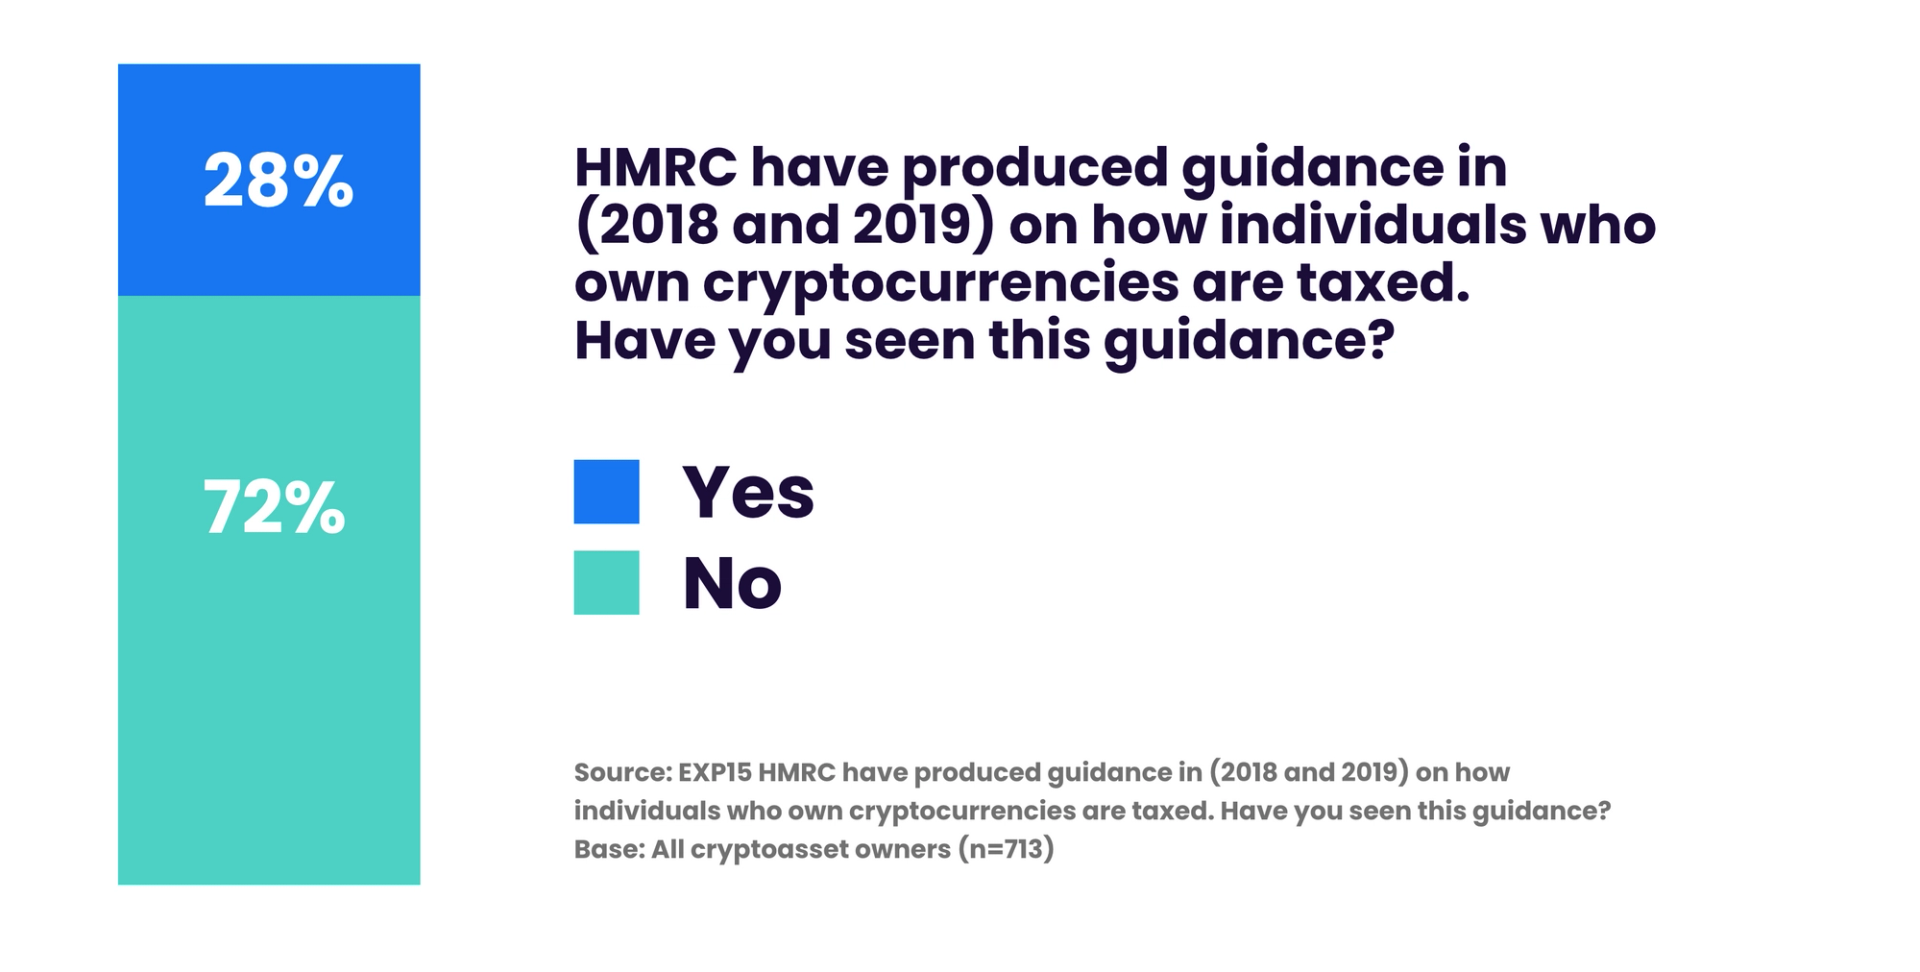 Chart showing the results of HMRC Survey question "Have you seen HMRC guidance (2018/2019) on how individuals who own cryptocurrencies are taxed?" 28% responded Yes and 72, No.